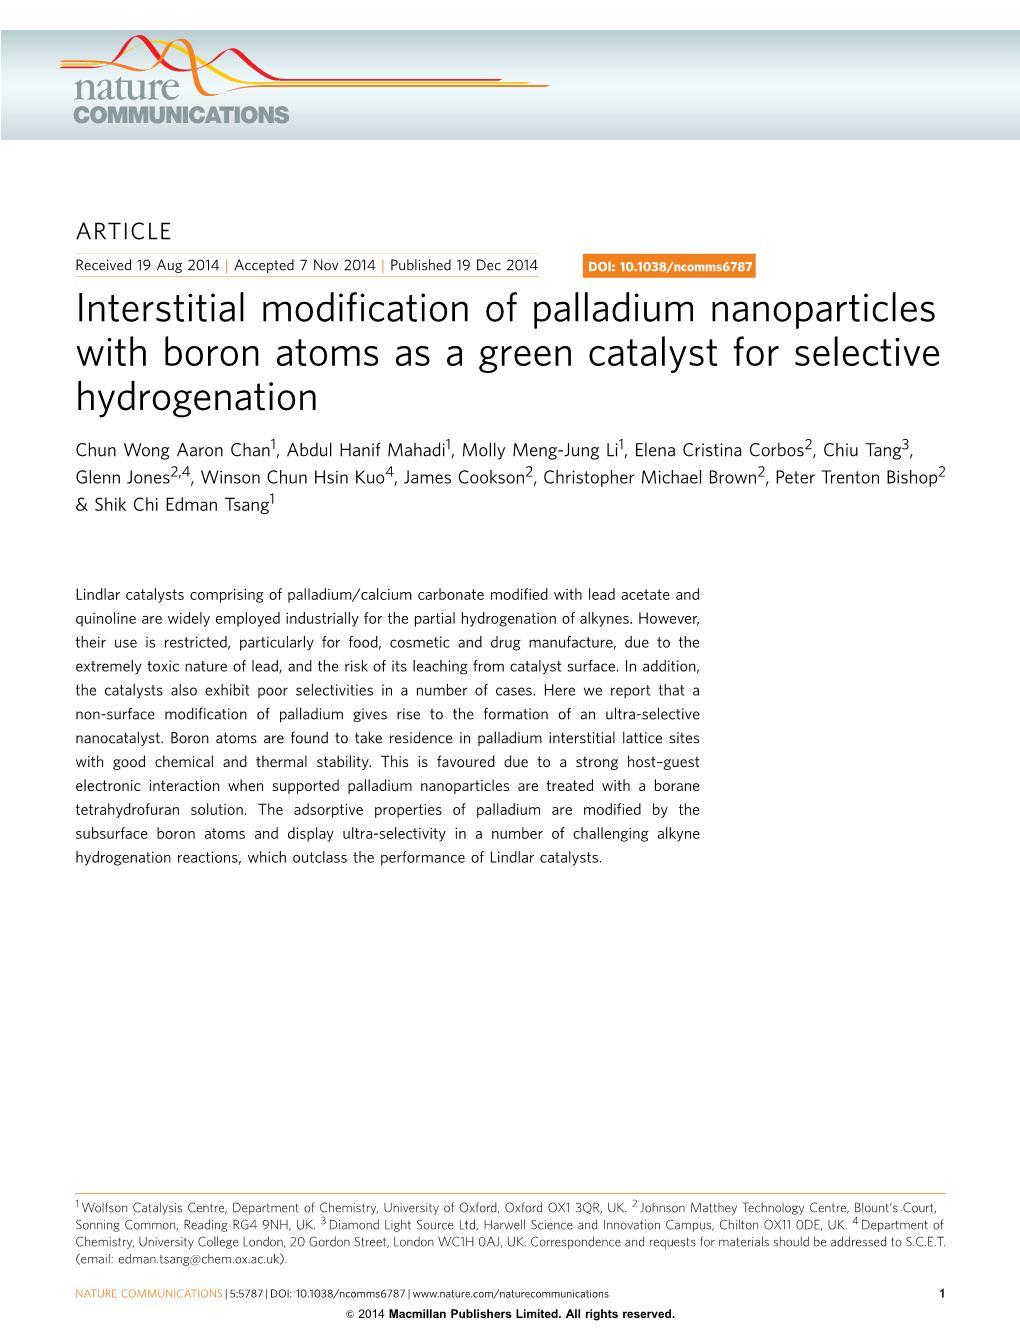 Interstitial Modification of Palladium Nanoparticles with Boron Atoms As